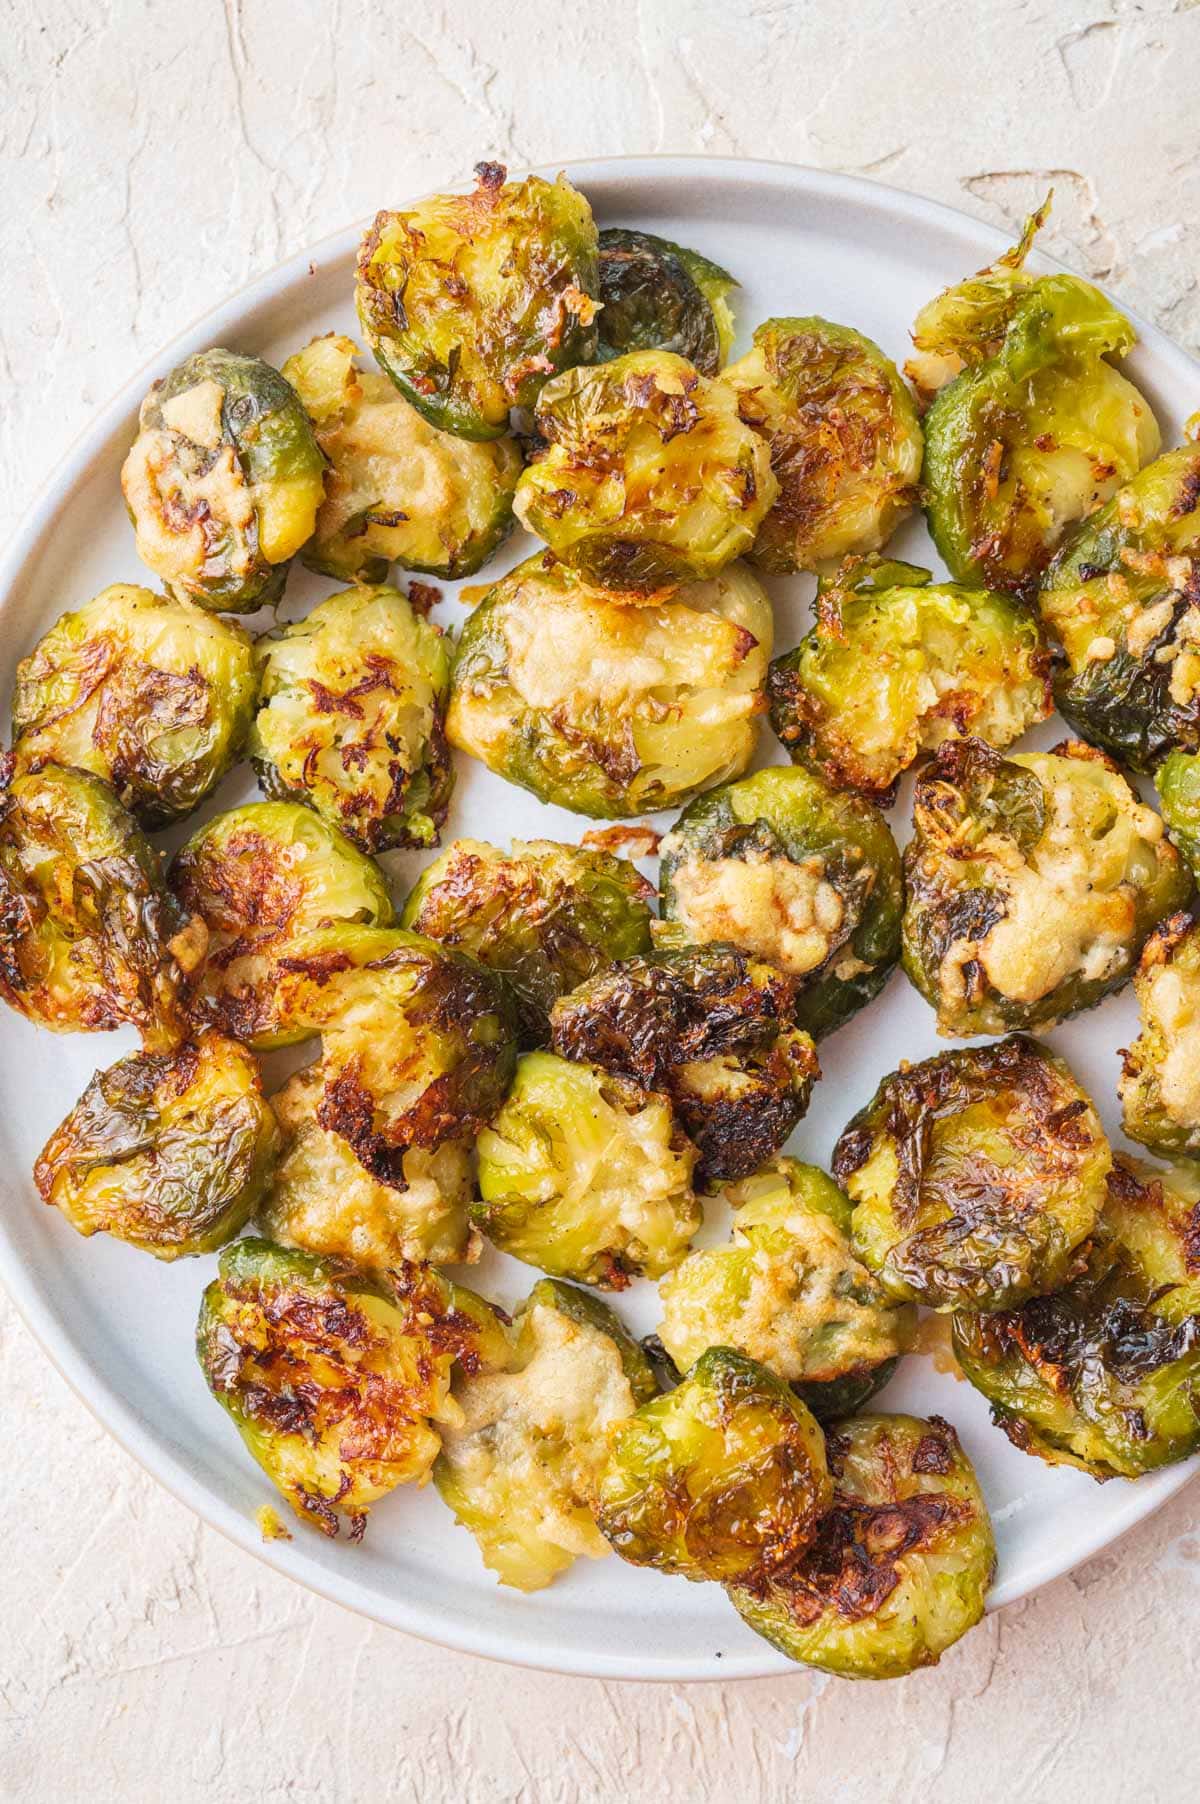 Smashed Brussel Sprouts on a white plate.